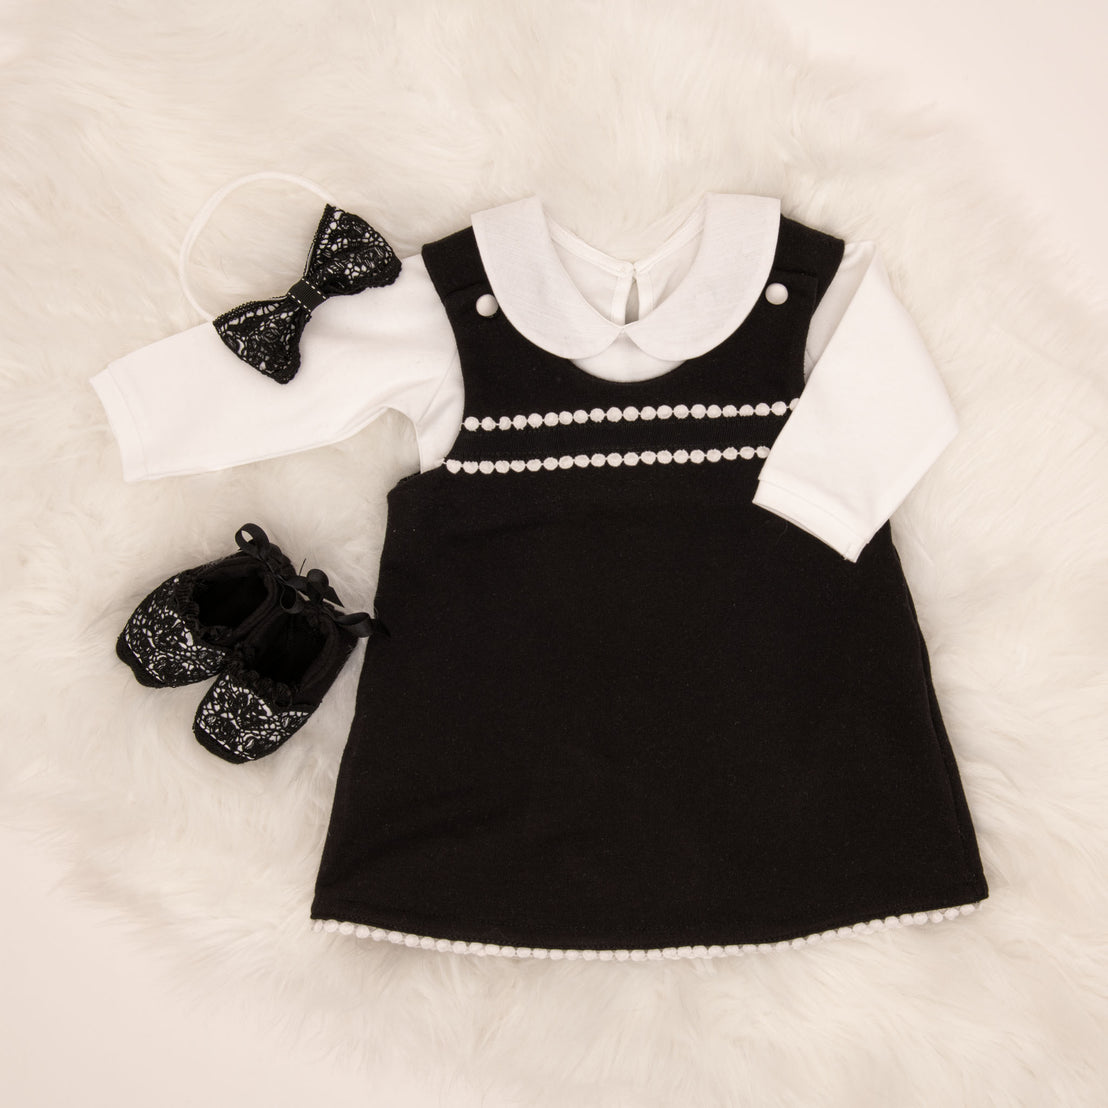 A stylish baby girl outfit on a fluffy white background, including a June Jumper Dress Set with white pearl details, matching black and white shoes, and a lace headband with bow.